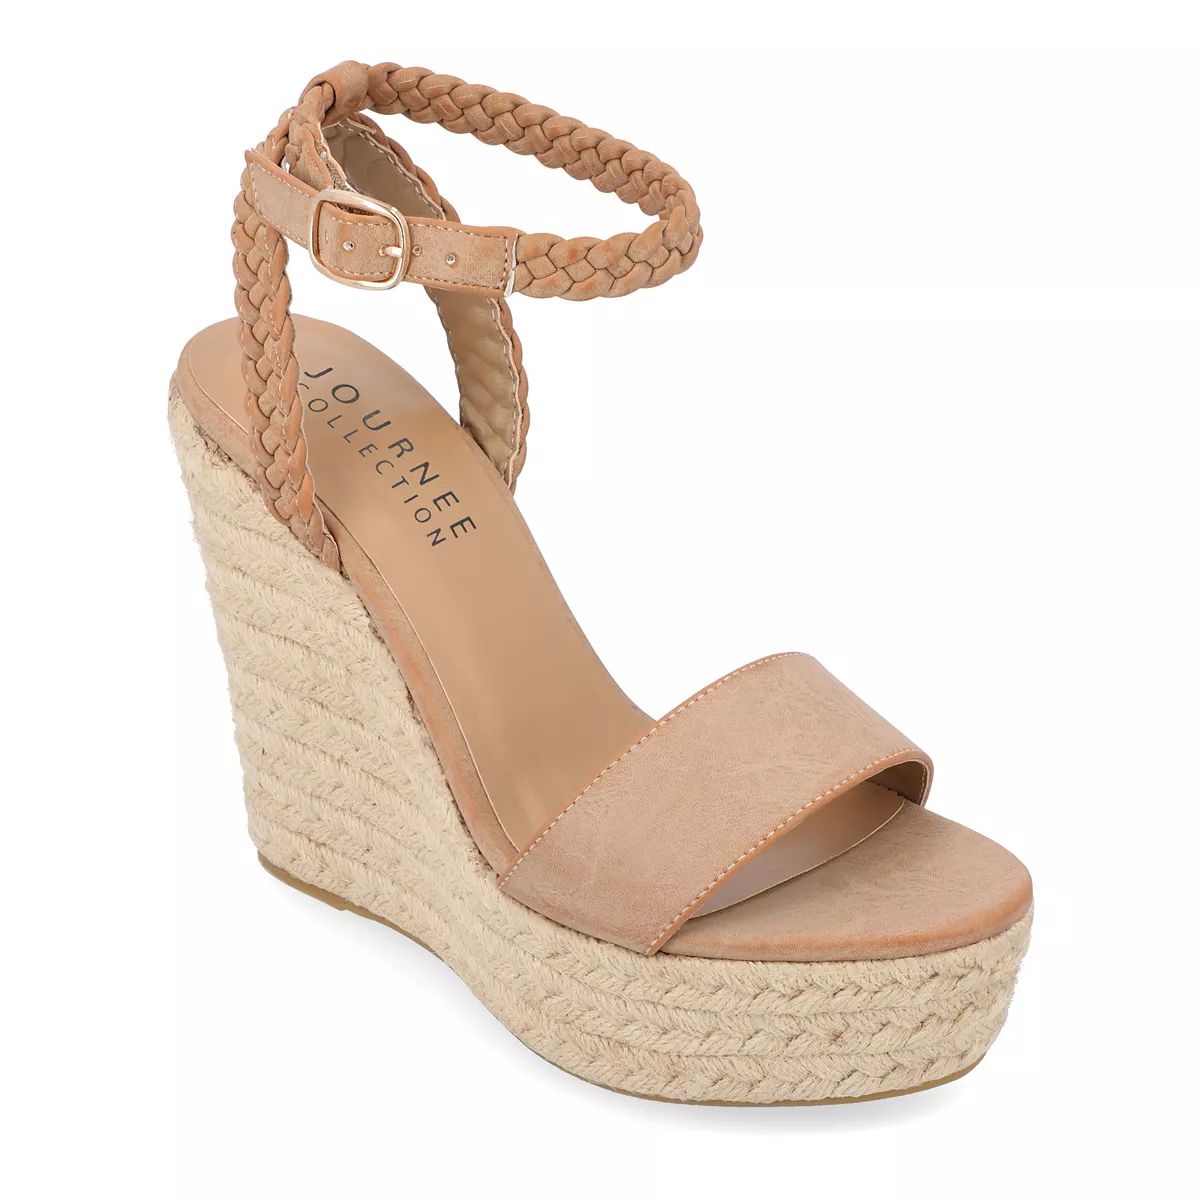 Journee Collection Andiah Women's Wedge Sandals | Kohl's